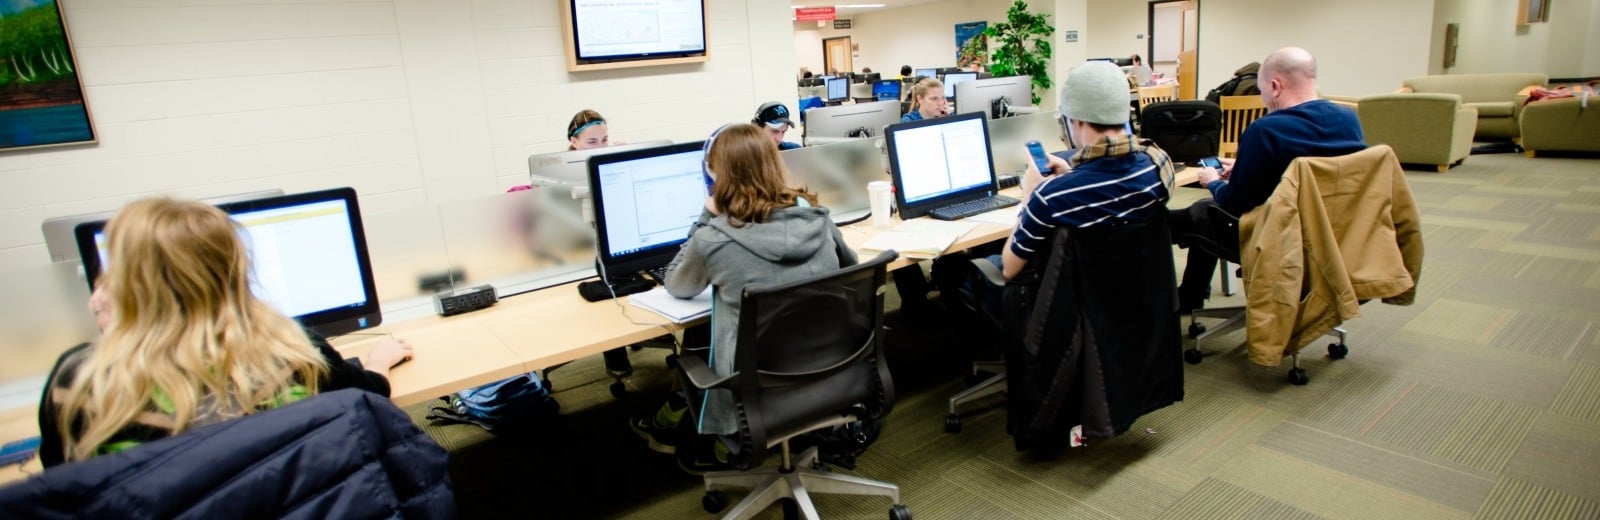 Students work at computer bank in the campus library